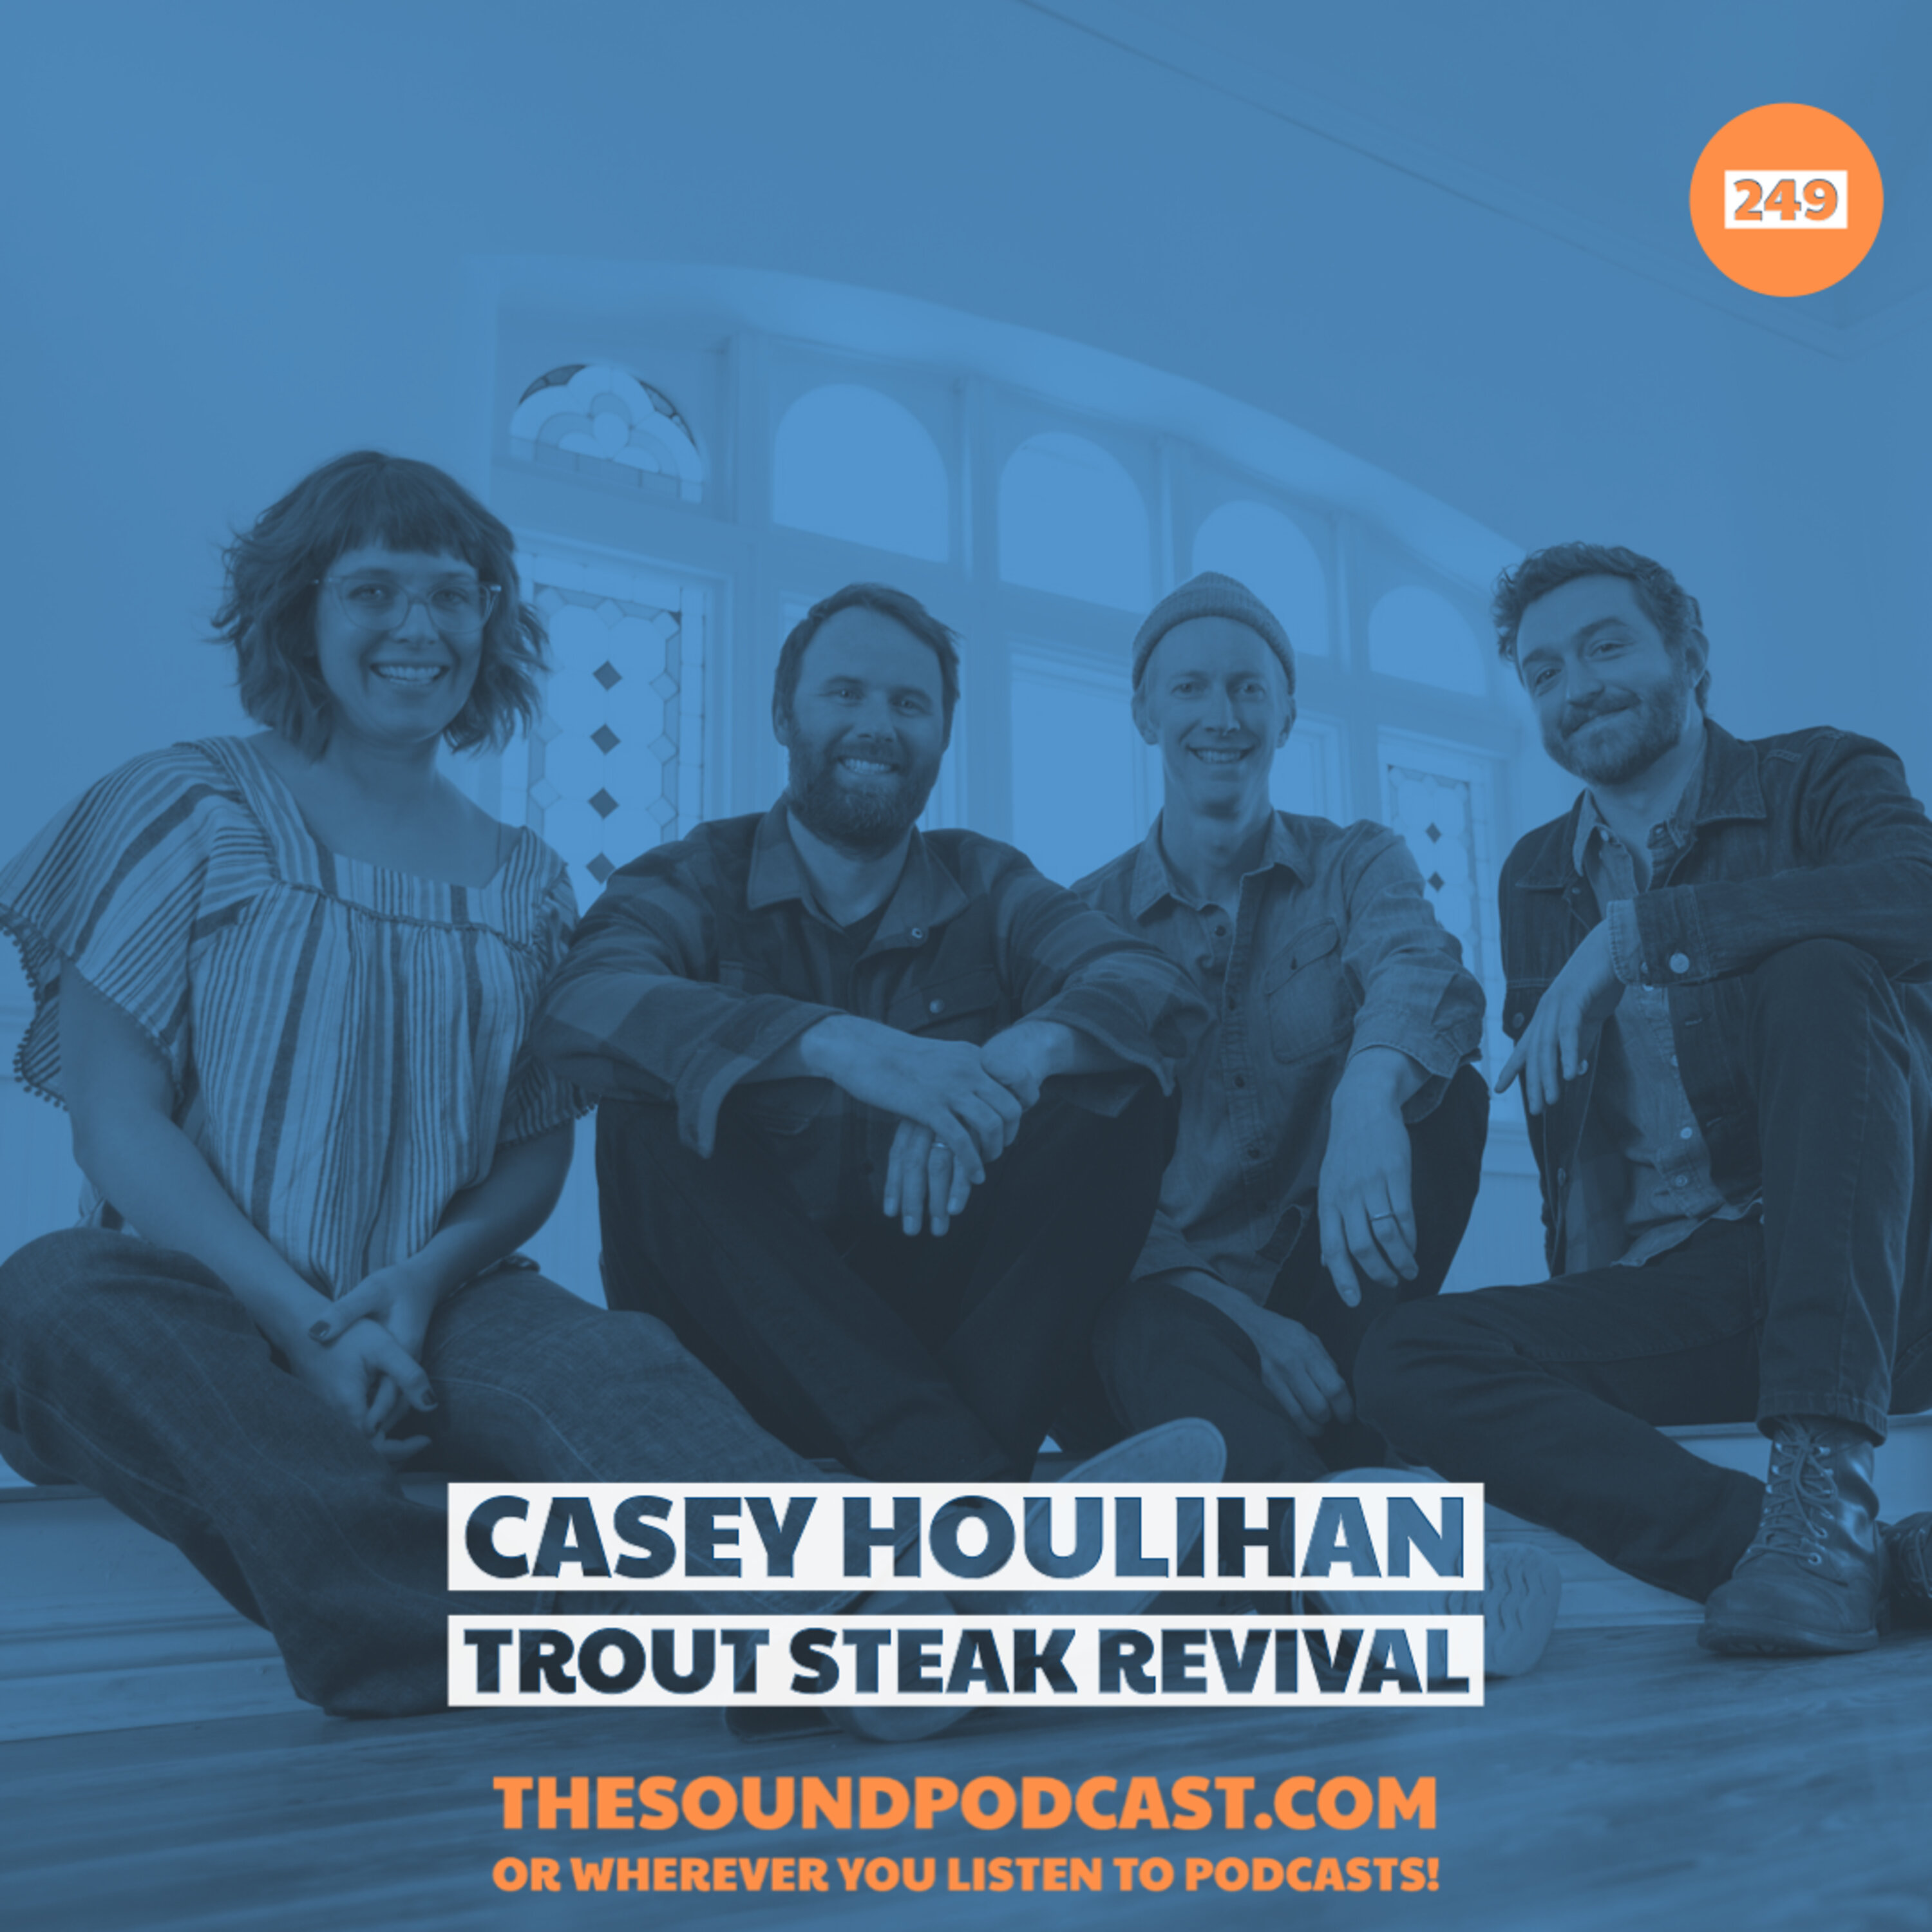 Casey Houlihan from Trout Steak Revival Image